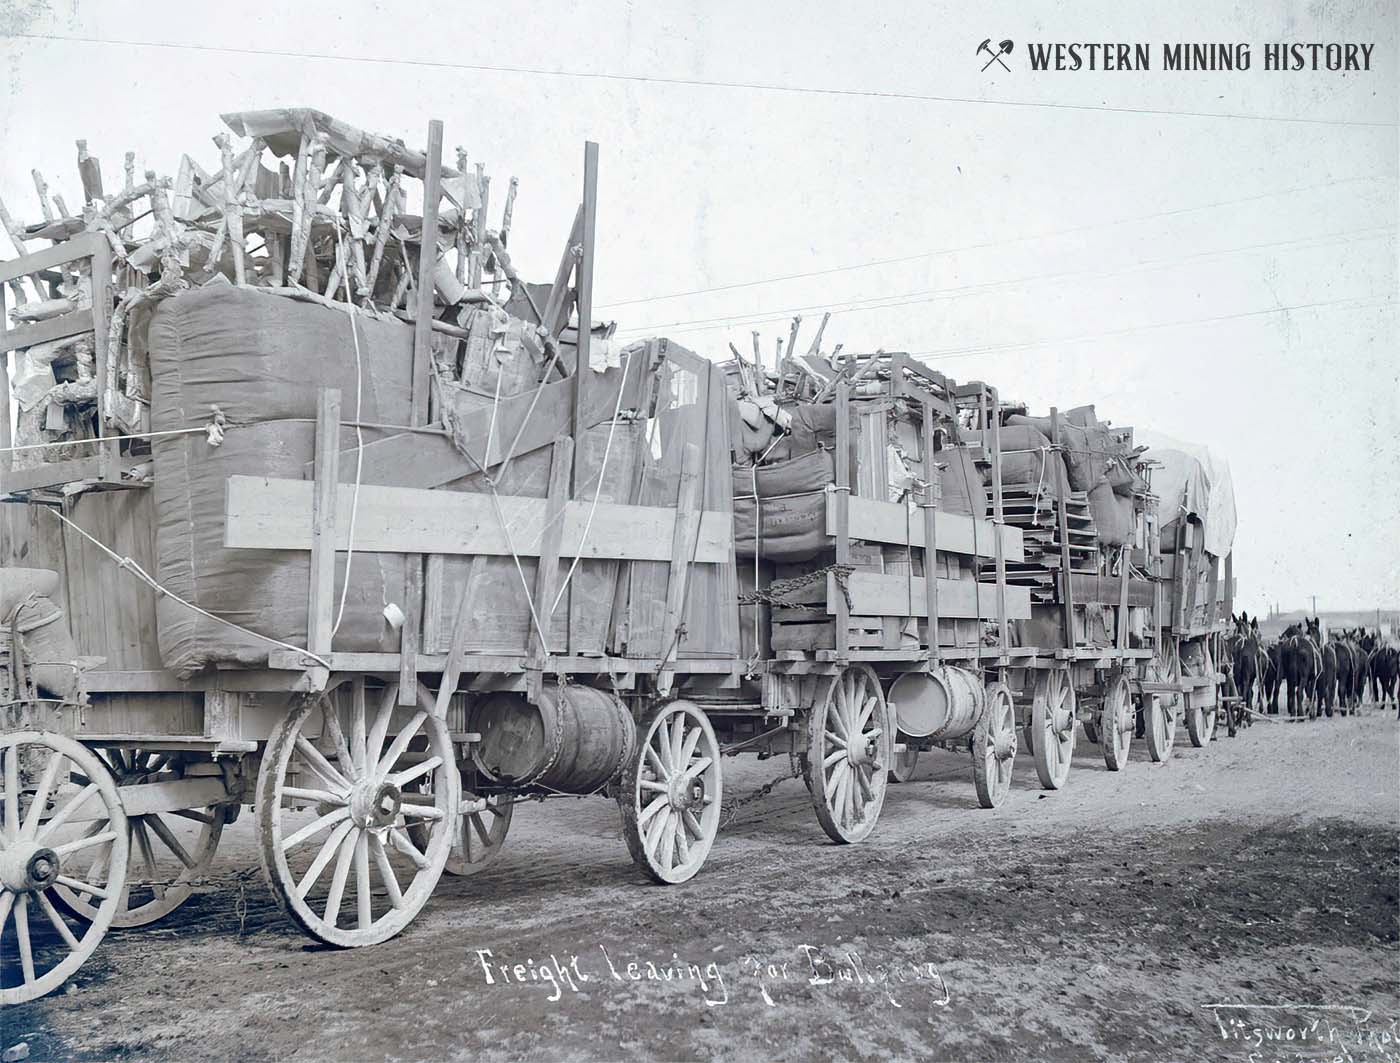 Freight wagons heading from Goldfield to the Bullfrog Mining Rush